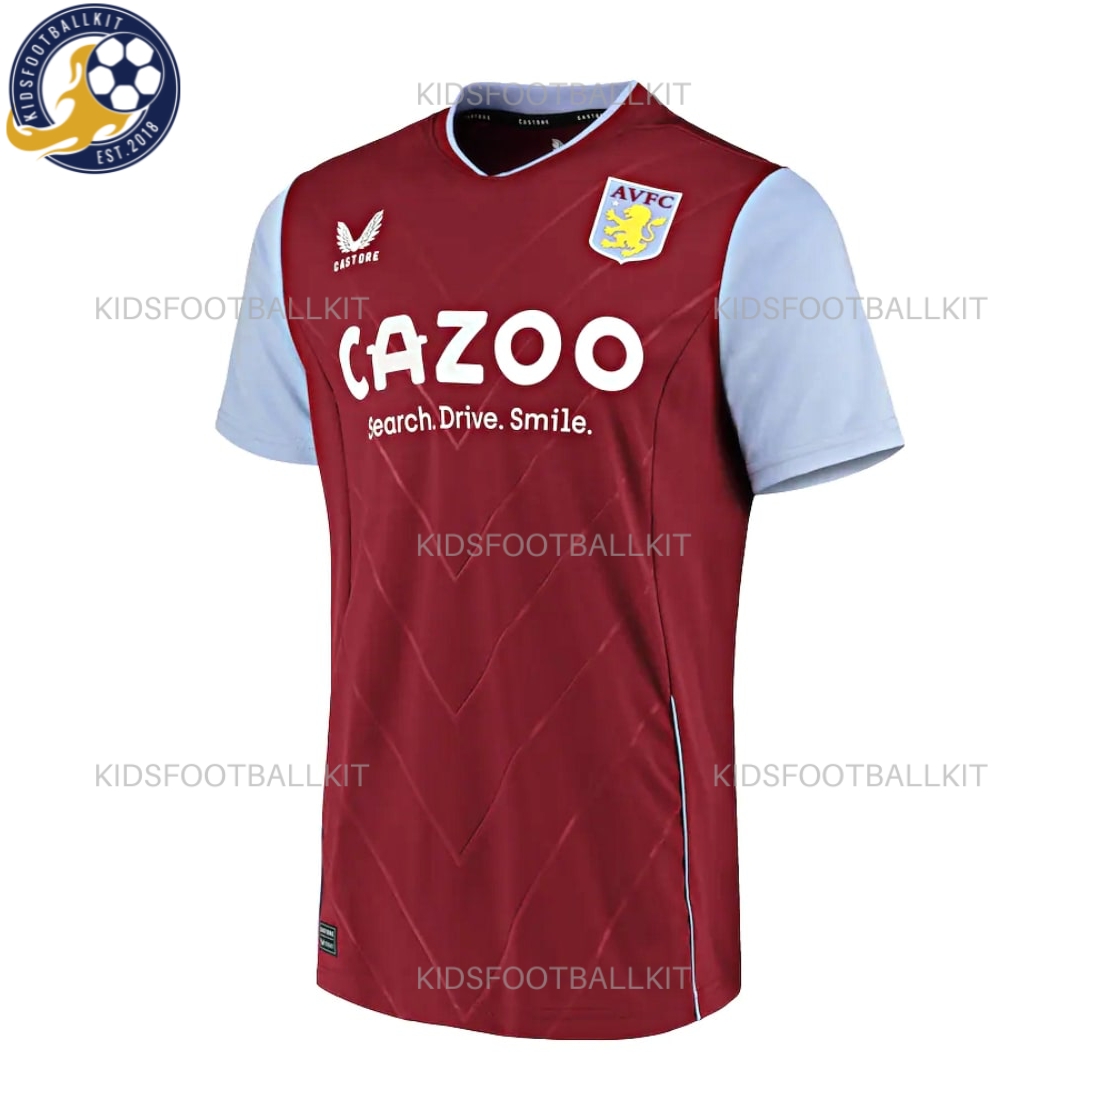 Aston Villa Home Kit 22/23 | Discounted Price from £25.99